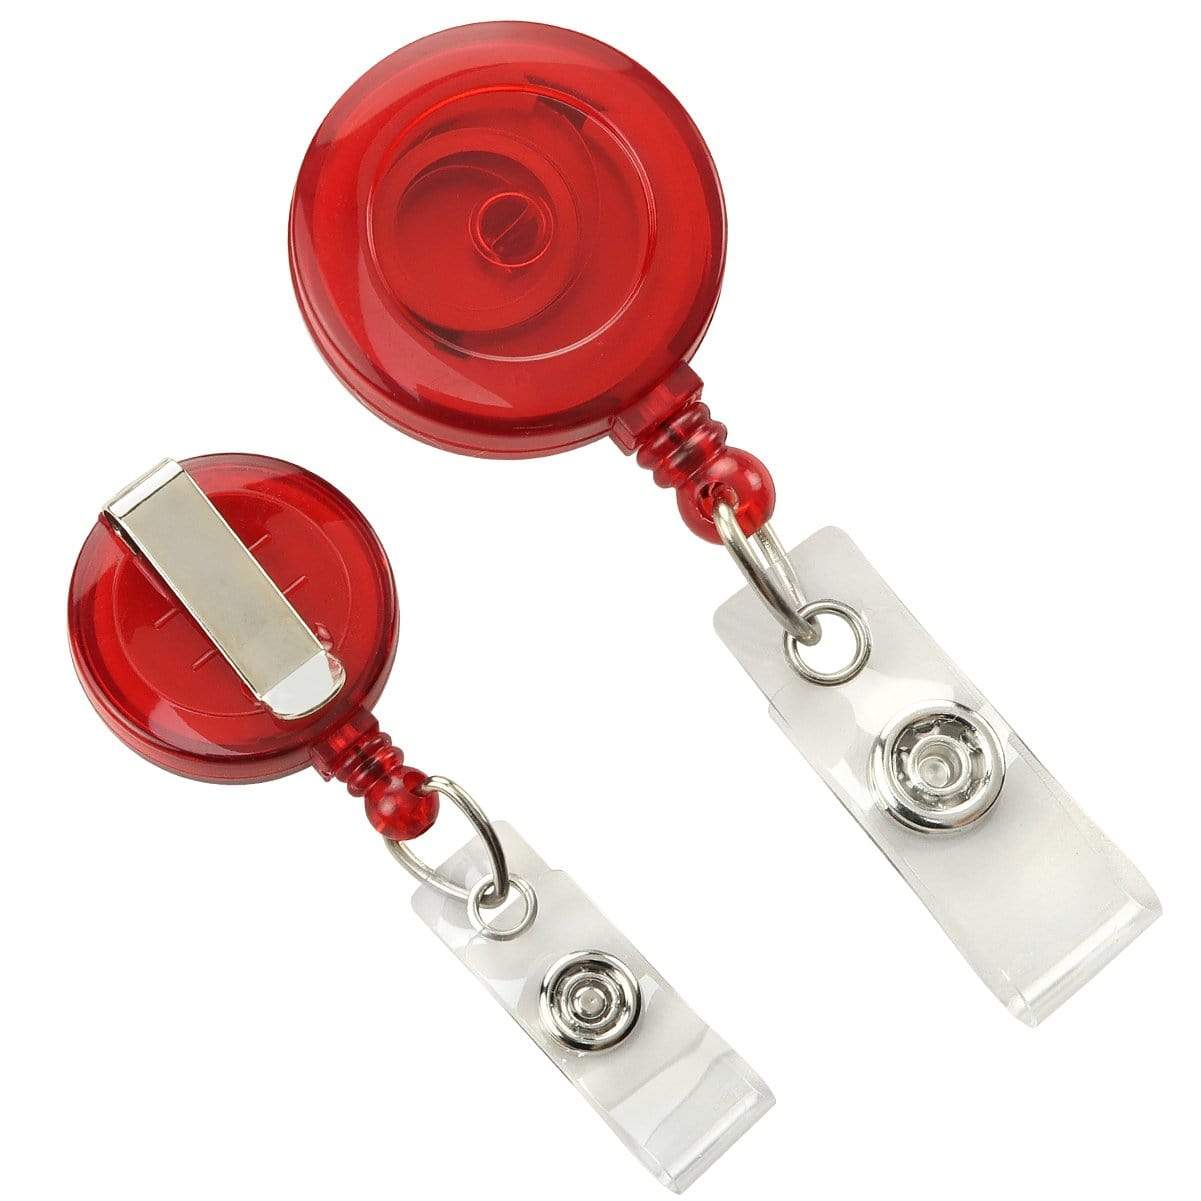 Translucent Red Translucent Retractable Badge Reel With Belt Clip (P/N 2120-360X) 2120-3606